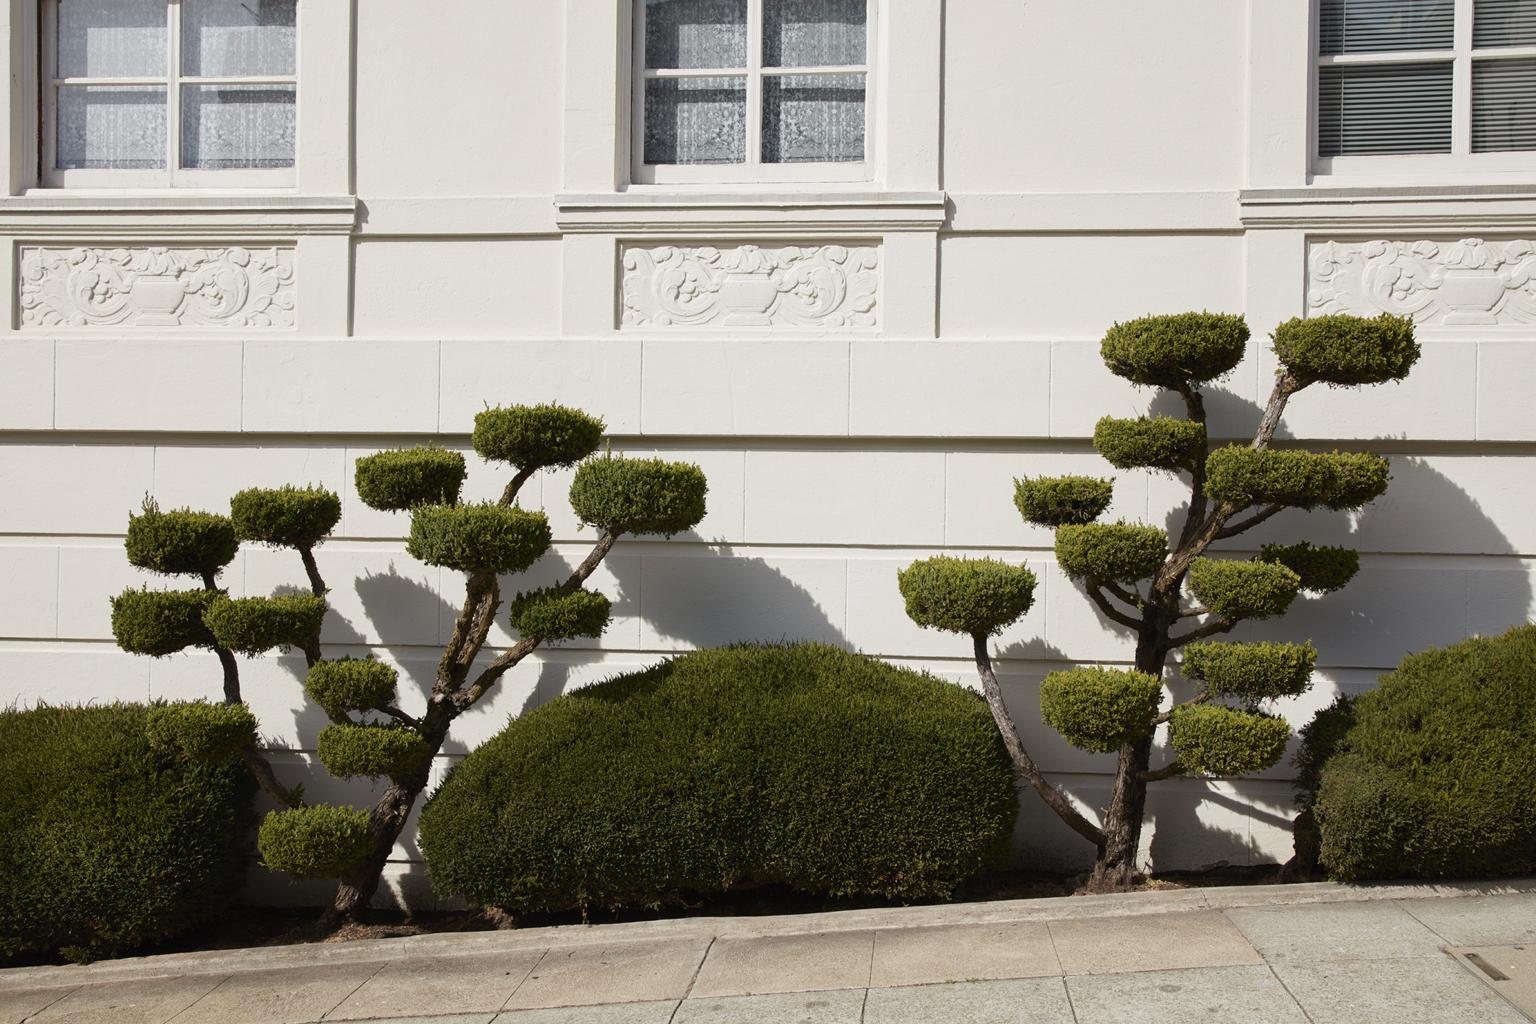 Topiary II - large format photograph of ornamental shaped sidewalk trees